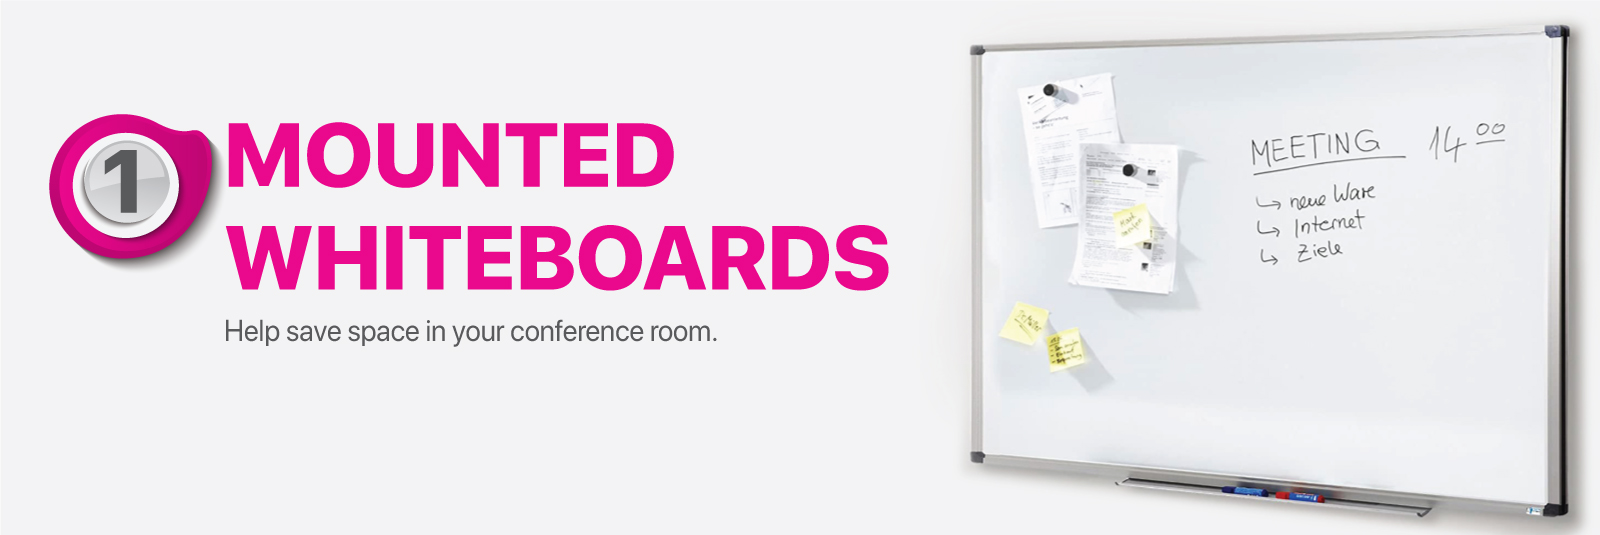 Mounted whiteboard help save space in your conference room.